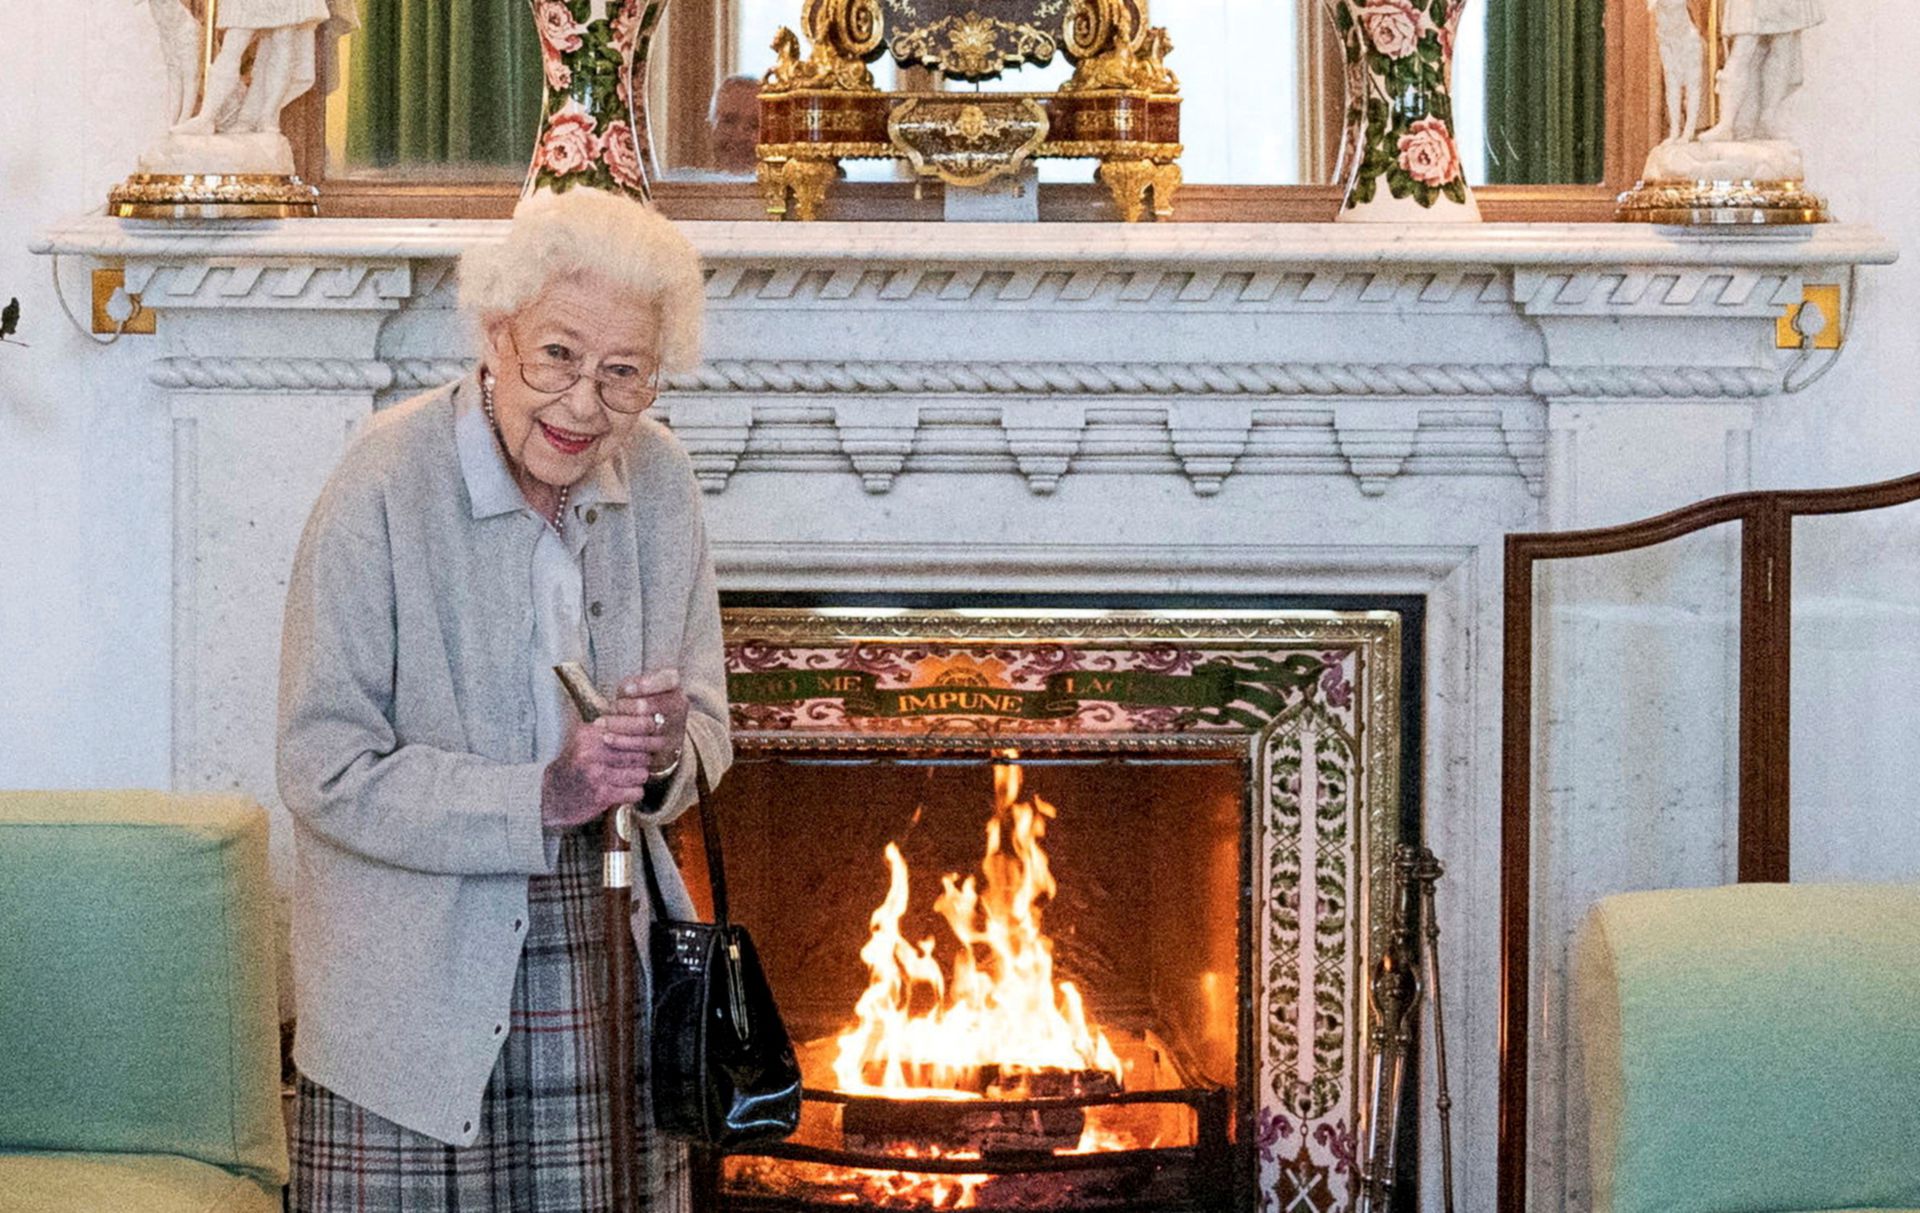 Her last public appearance. Britain’s Queen Elizabeth waits in the Drawing Room before receiving Liz Truss for an audience, where she invited the newly elected leader of the Conservative party to become Prime Minister and form a new government, at Balmoral Castle, Scotland, Britain September 6, 2022. Jane Barlow/Pool via REUTERS